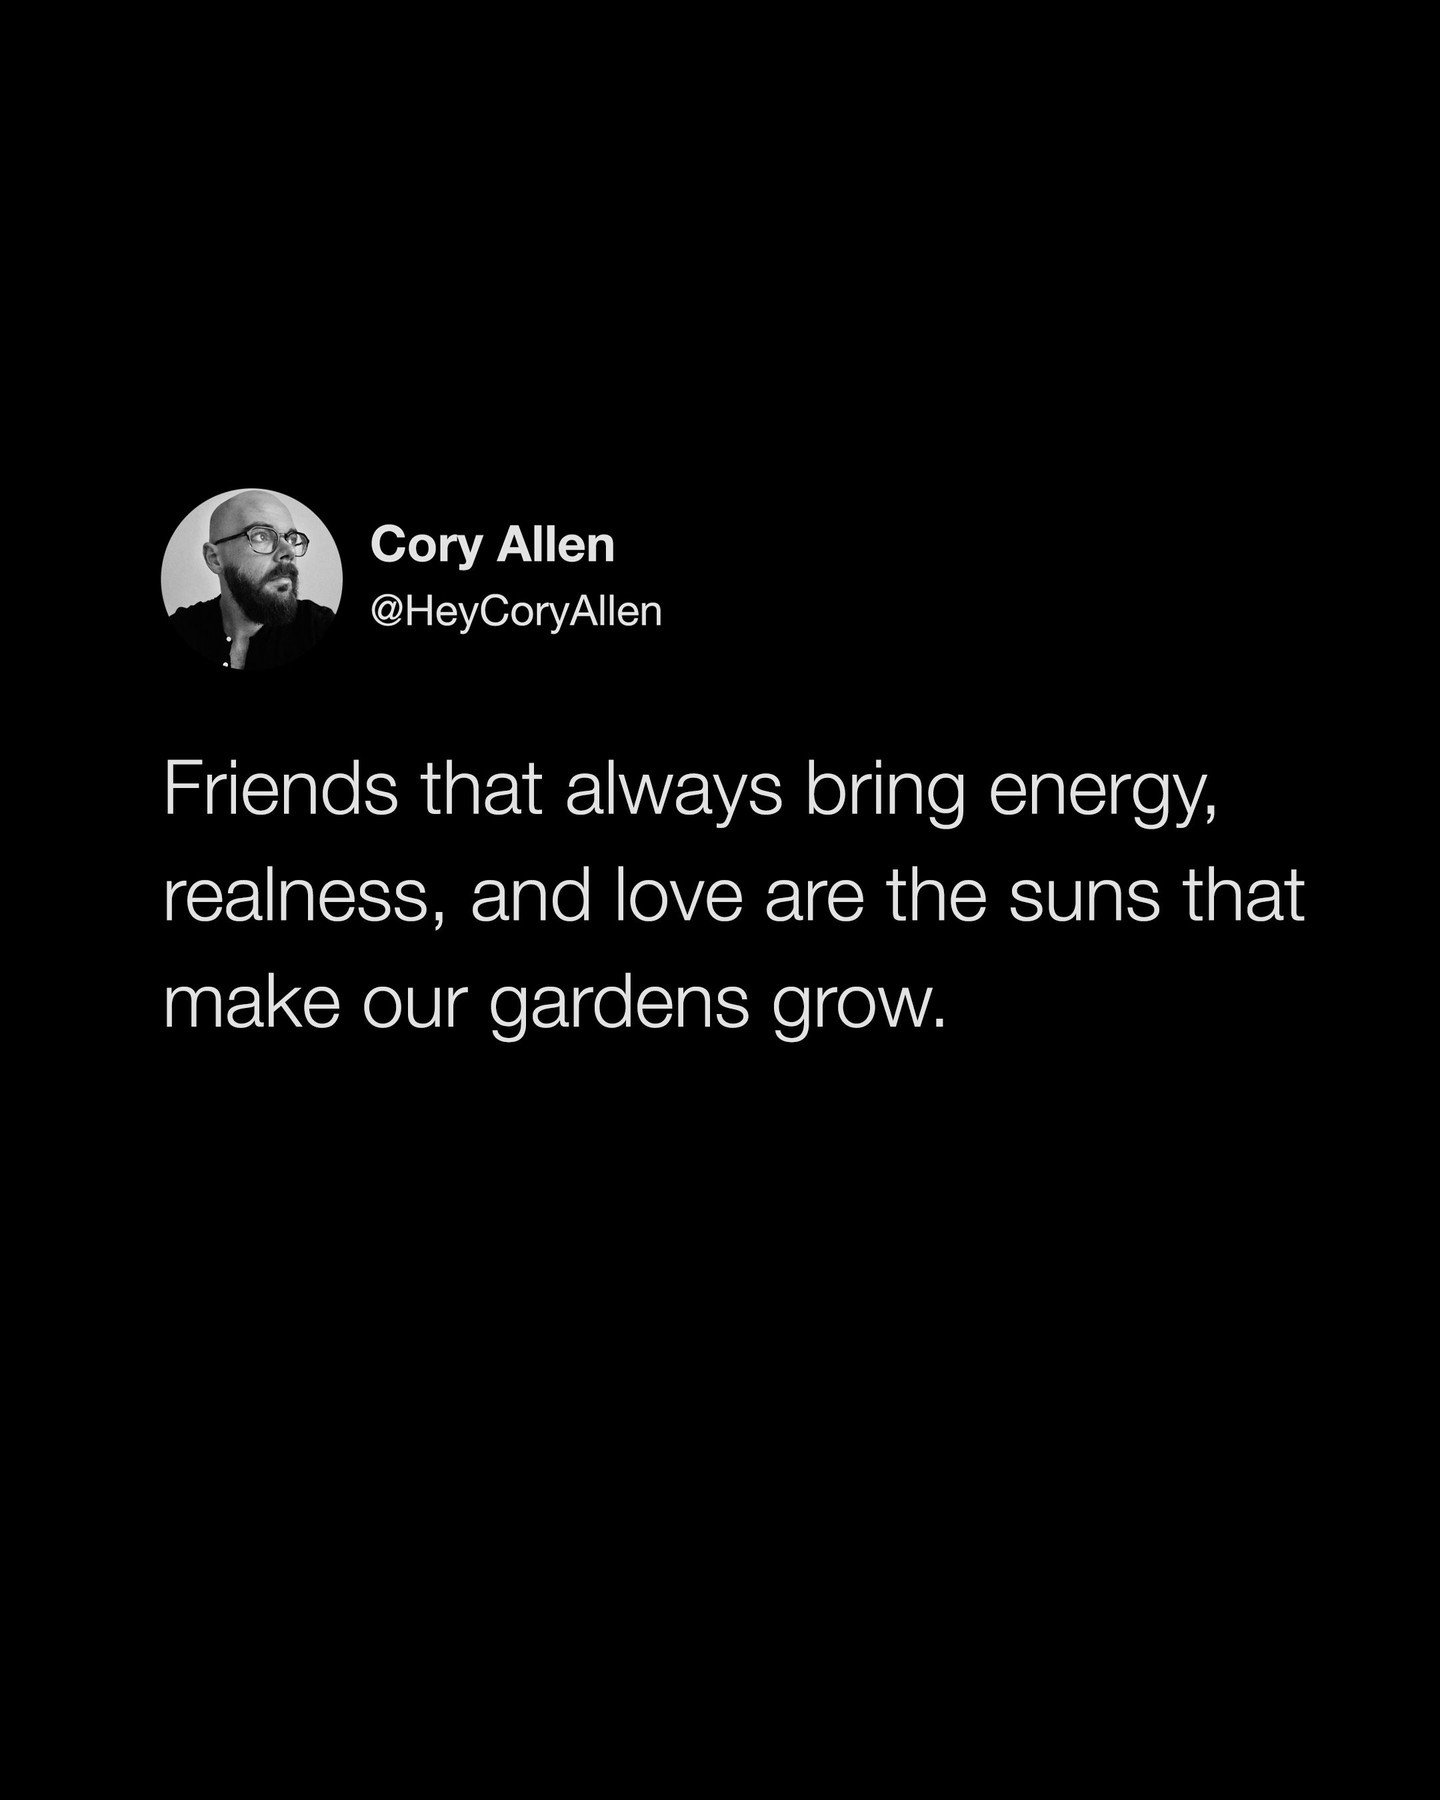 Show your friends some love in the comments 🖤☀️

@heycoryallen: Friends that always bring energy, realness, and love are the suns that make our gardens grow.